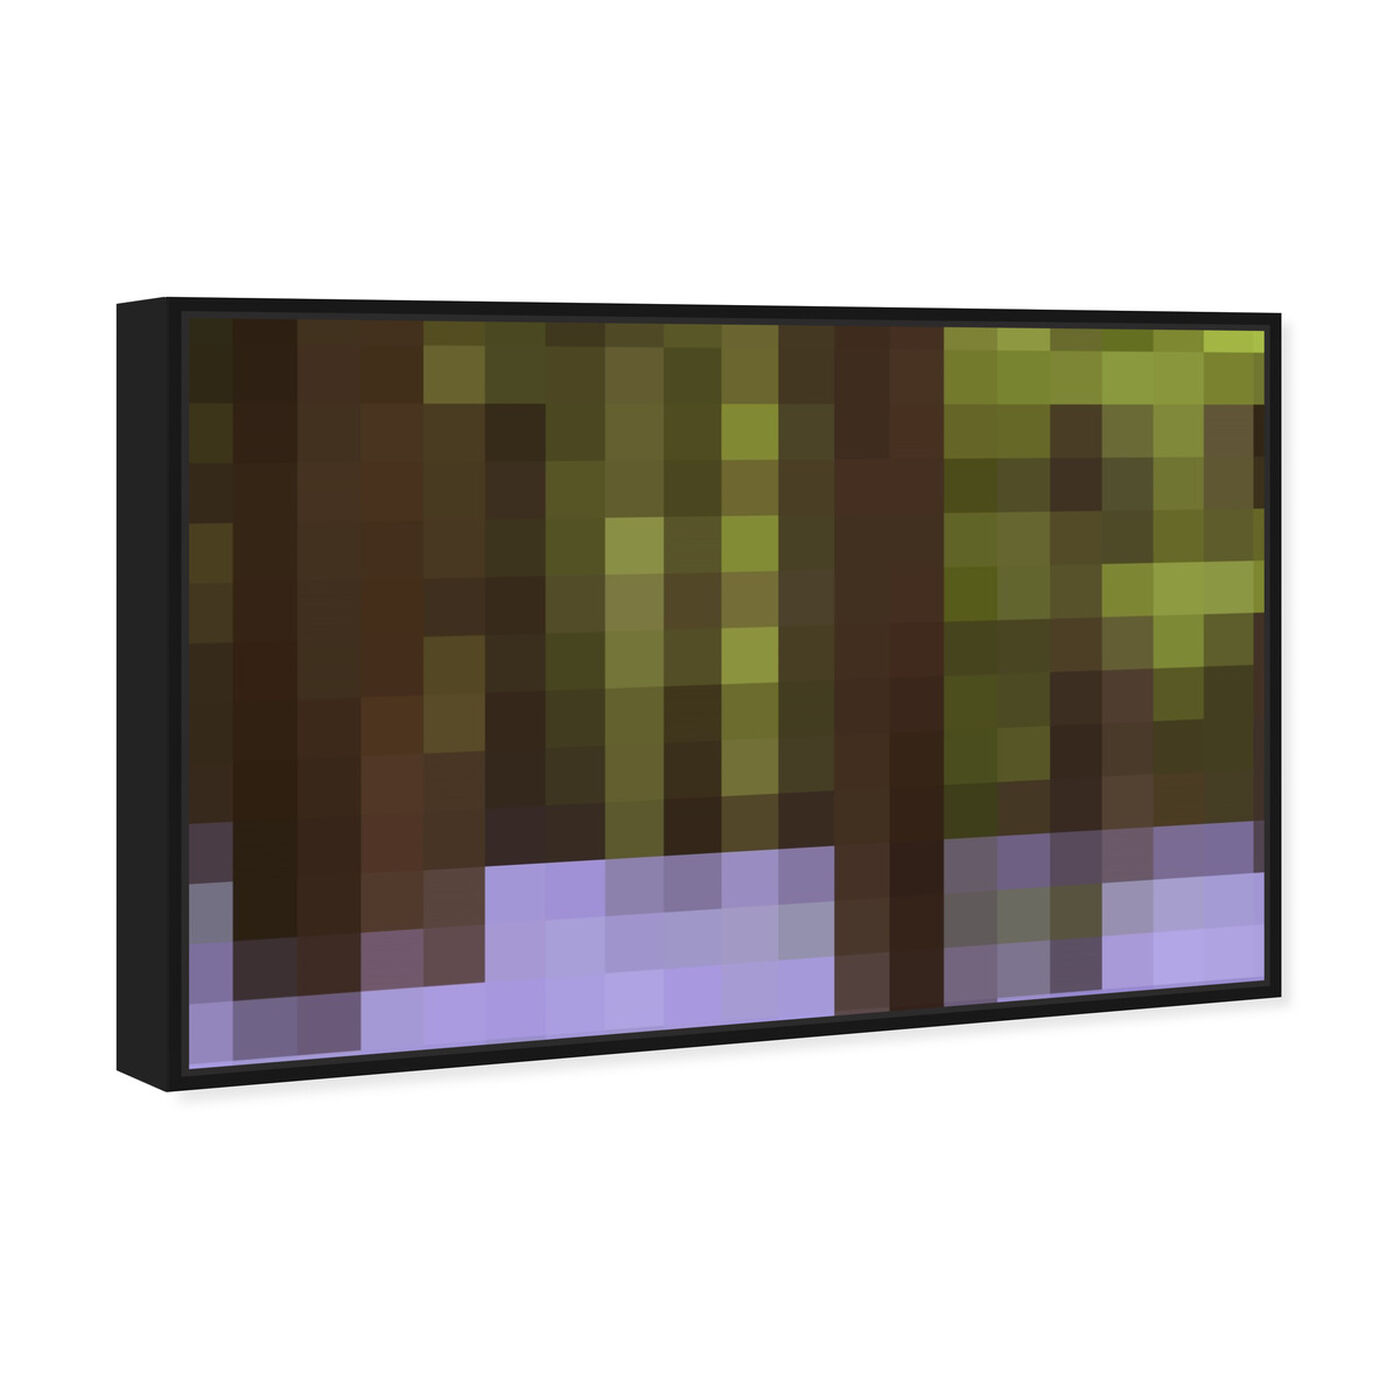 Angled view of Pixel Forest featuring abstract and textures art.